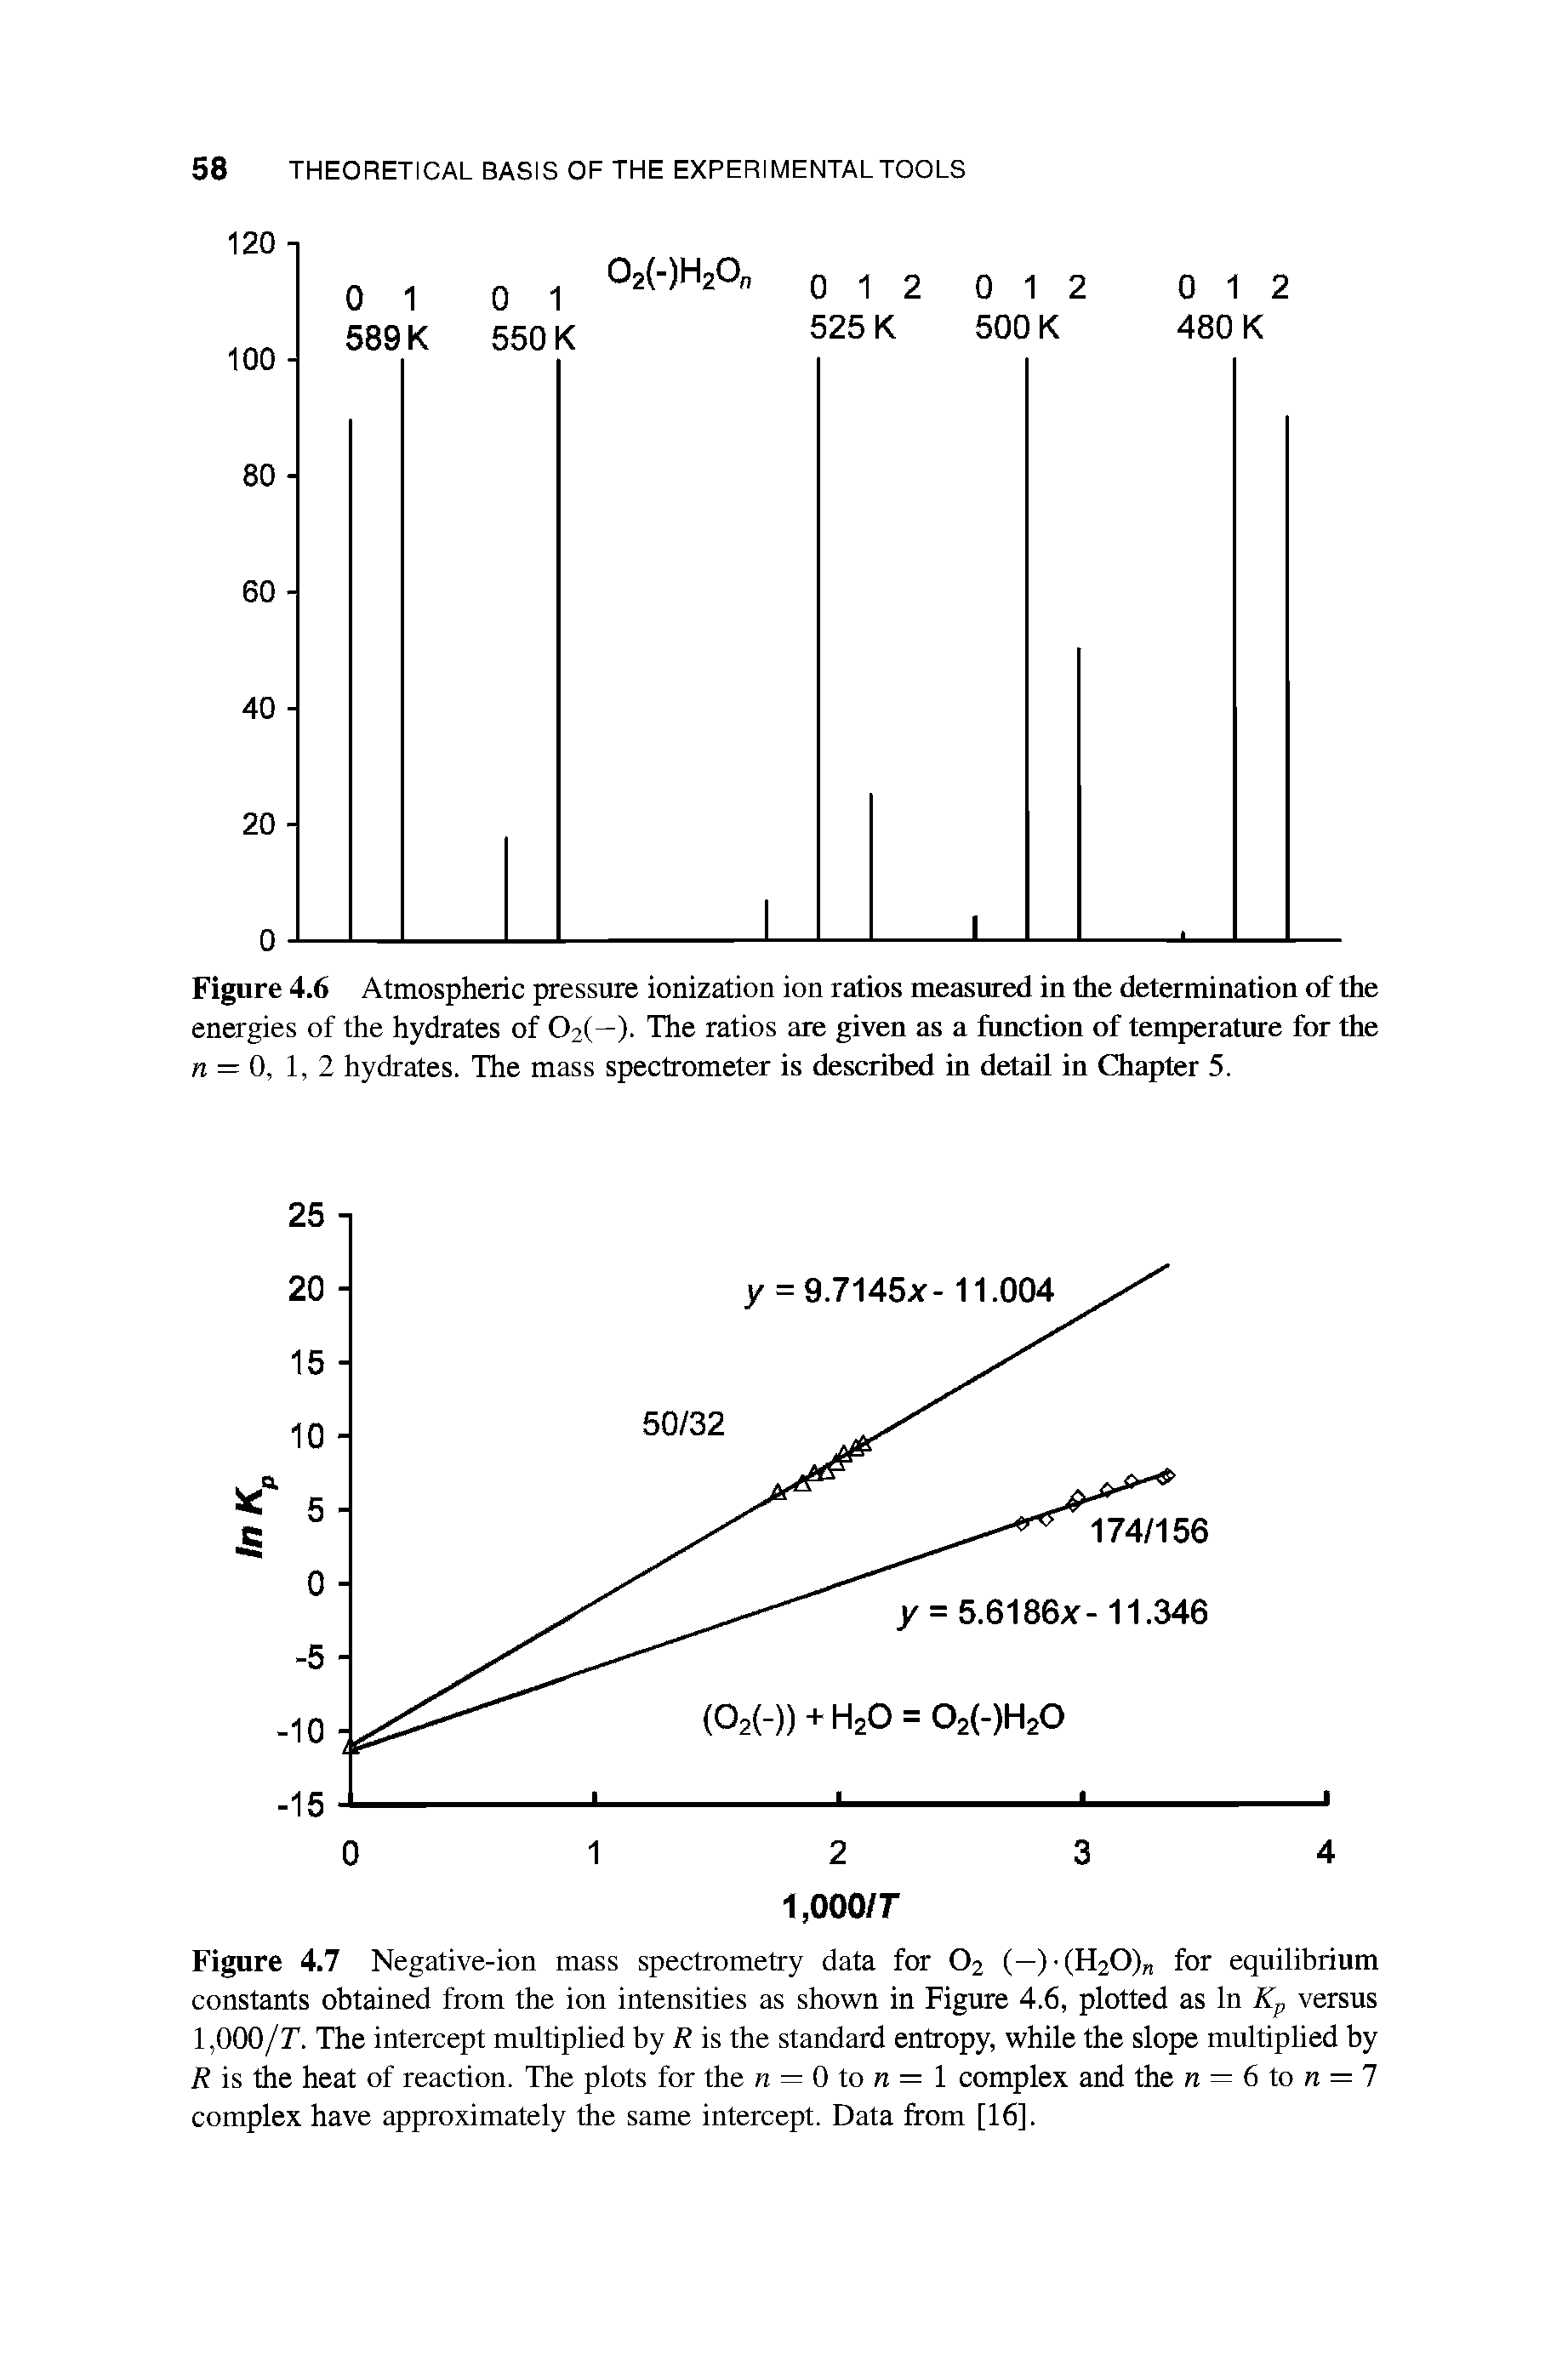 Figure 4.7 Negative-ion mass spectrometry data for 02 (—)-(H20) for equilibrium constants obtained from the ion intensities as shown in Figure 4.6, plotted as In Kp versus 1,000/r. The intercept multiplied by R is the standard entropy, while the slope multiplied by R is the heat of reaction. The plots for the n — 0 to n — 1 complex and the n — 6 to n = 7 complex have approximately the same intercept. Data from [16].